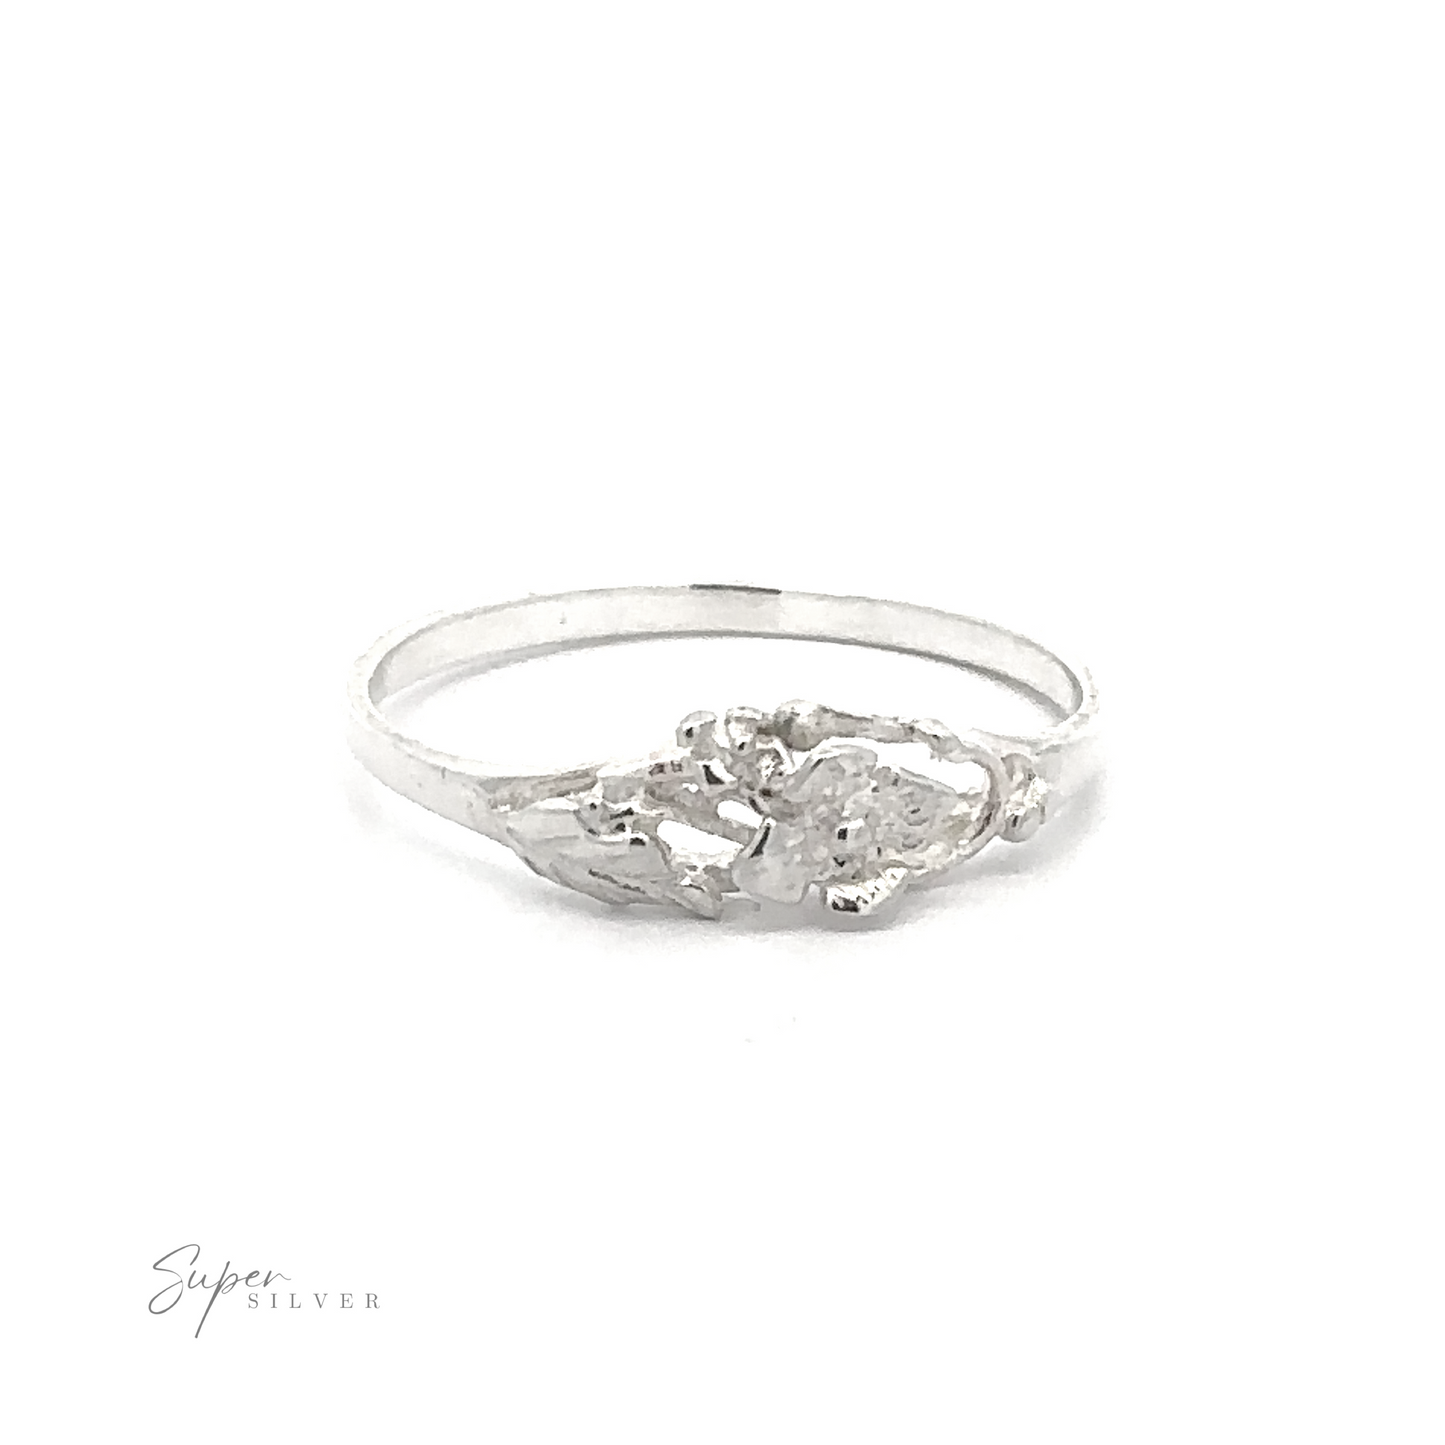 A Simple Wallflower Ring with an intricate design on a white background.